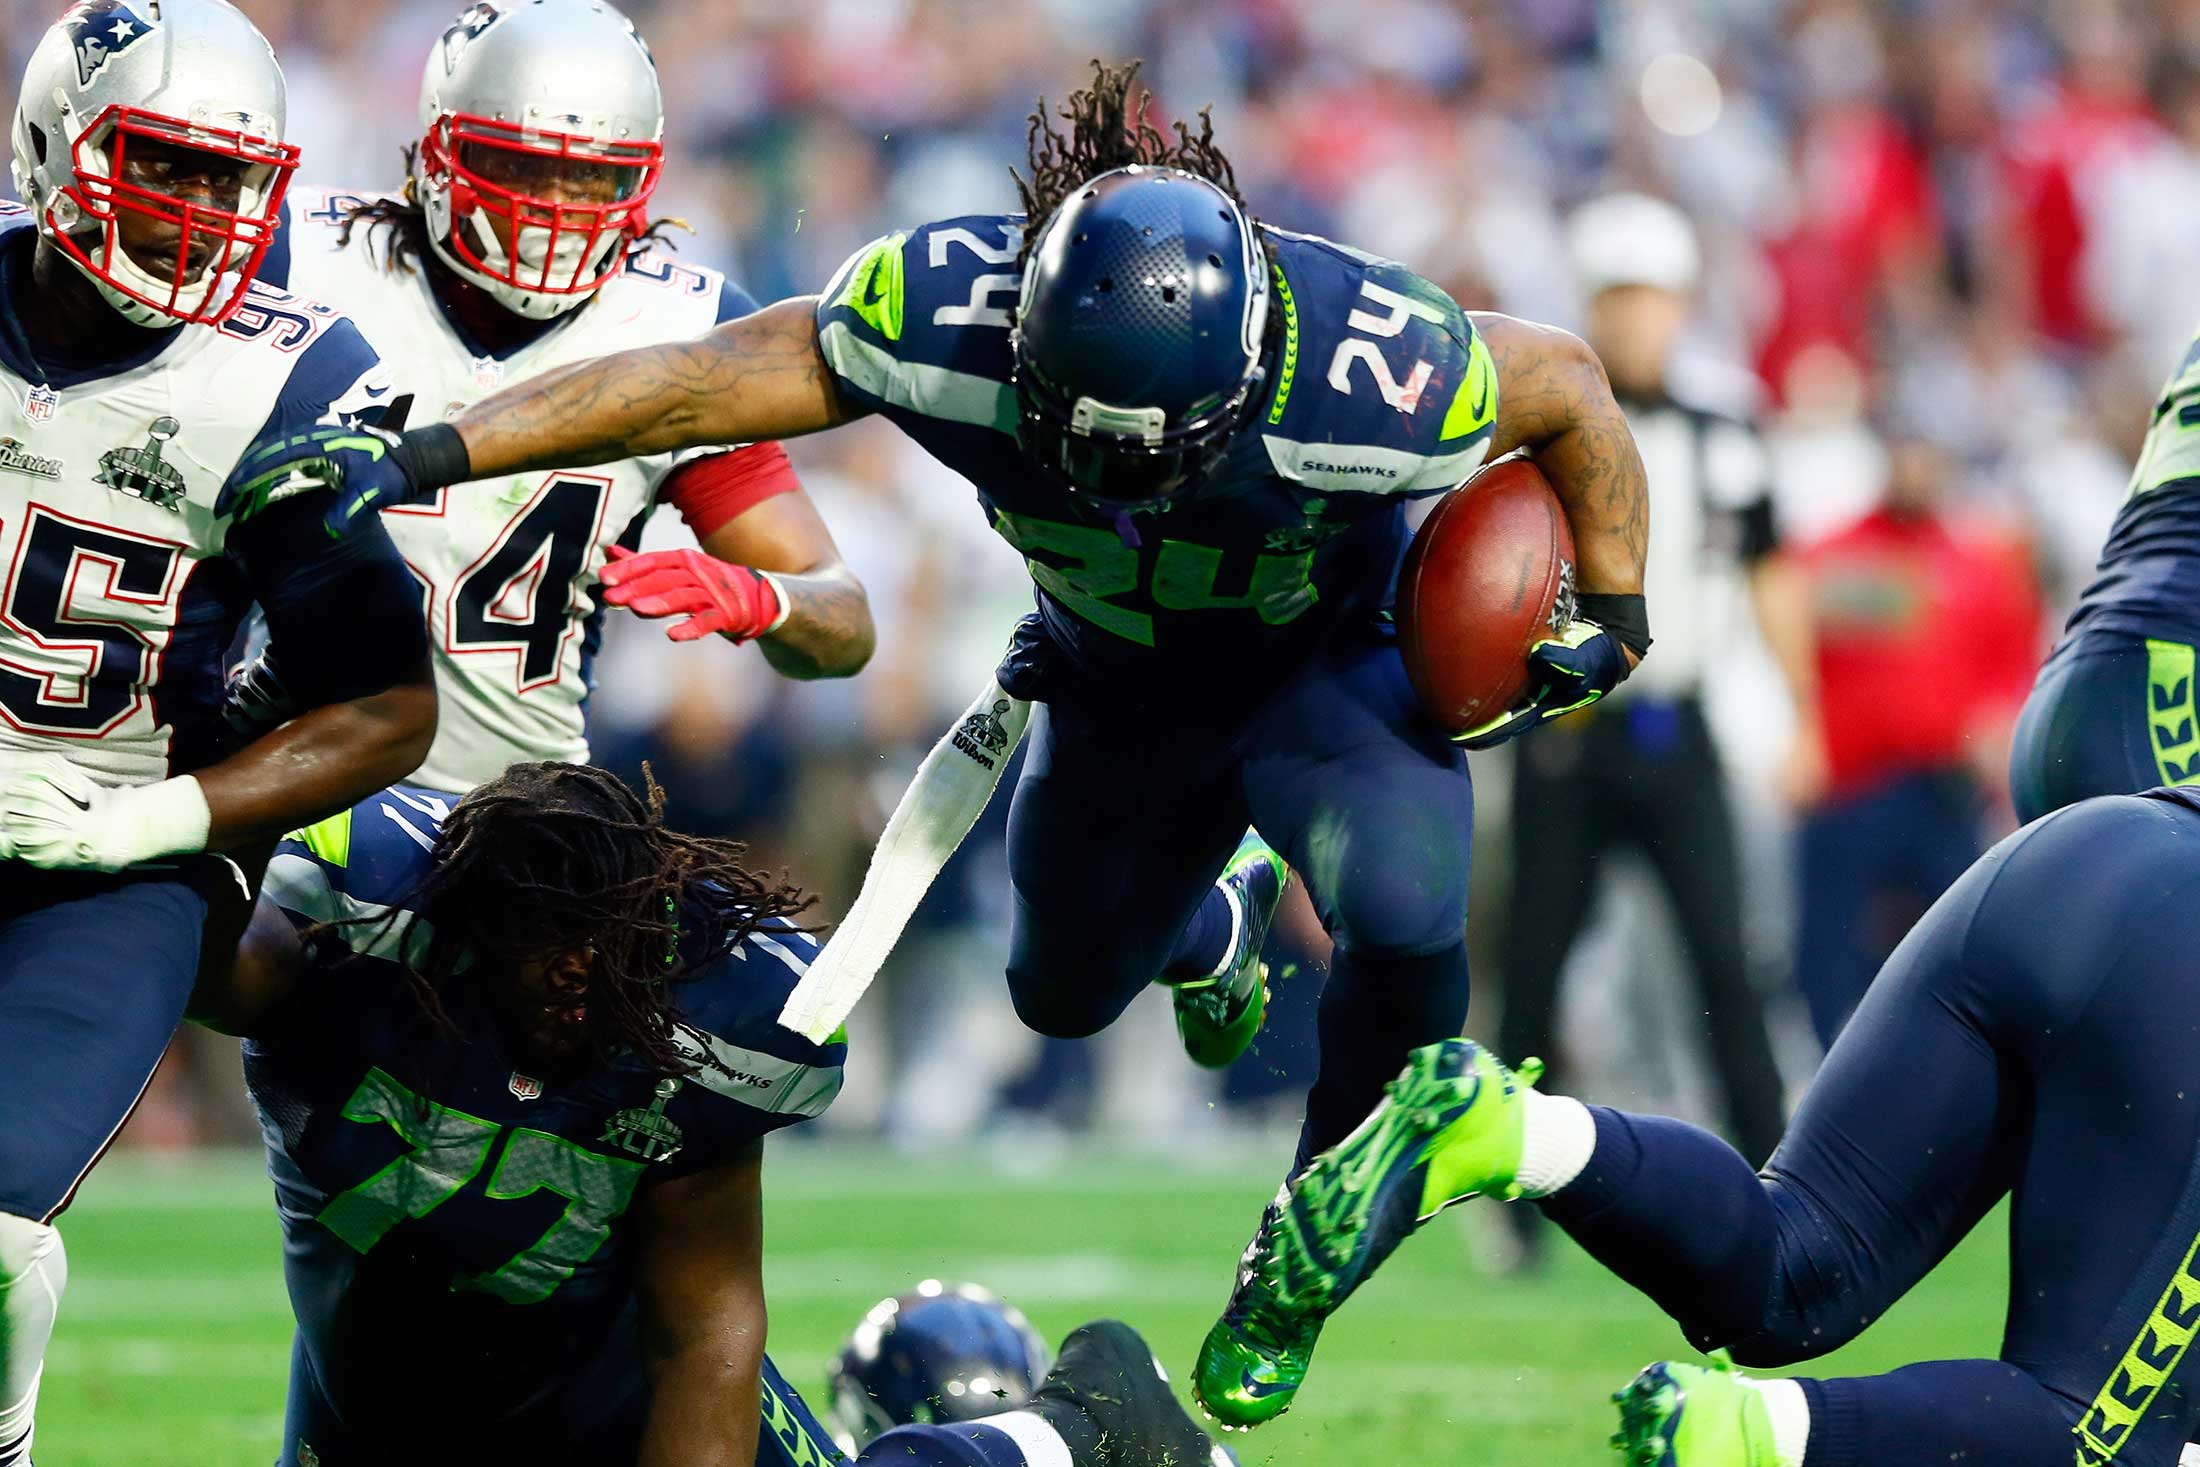 Running back Marshawn Lynch #24 of the Seattle Seahawks runs the ball against the New England Patriots during Super Bowl XLIX at University of Phoenix Stadium on Feb. 1, 2015 in Glendale, Ariz.
